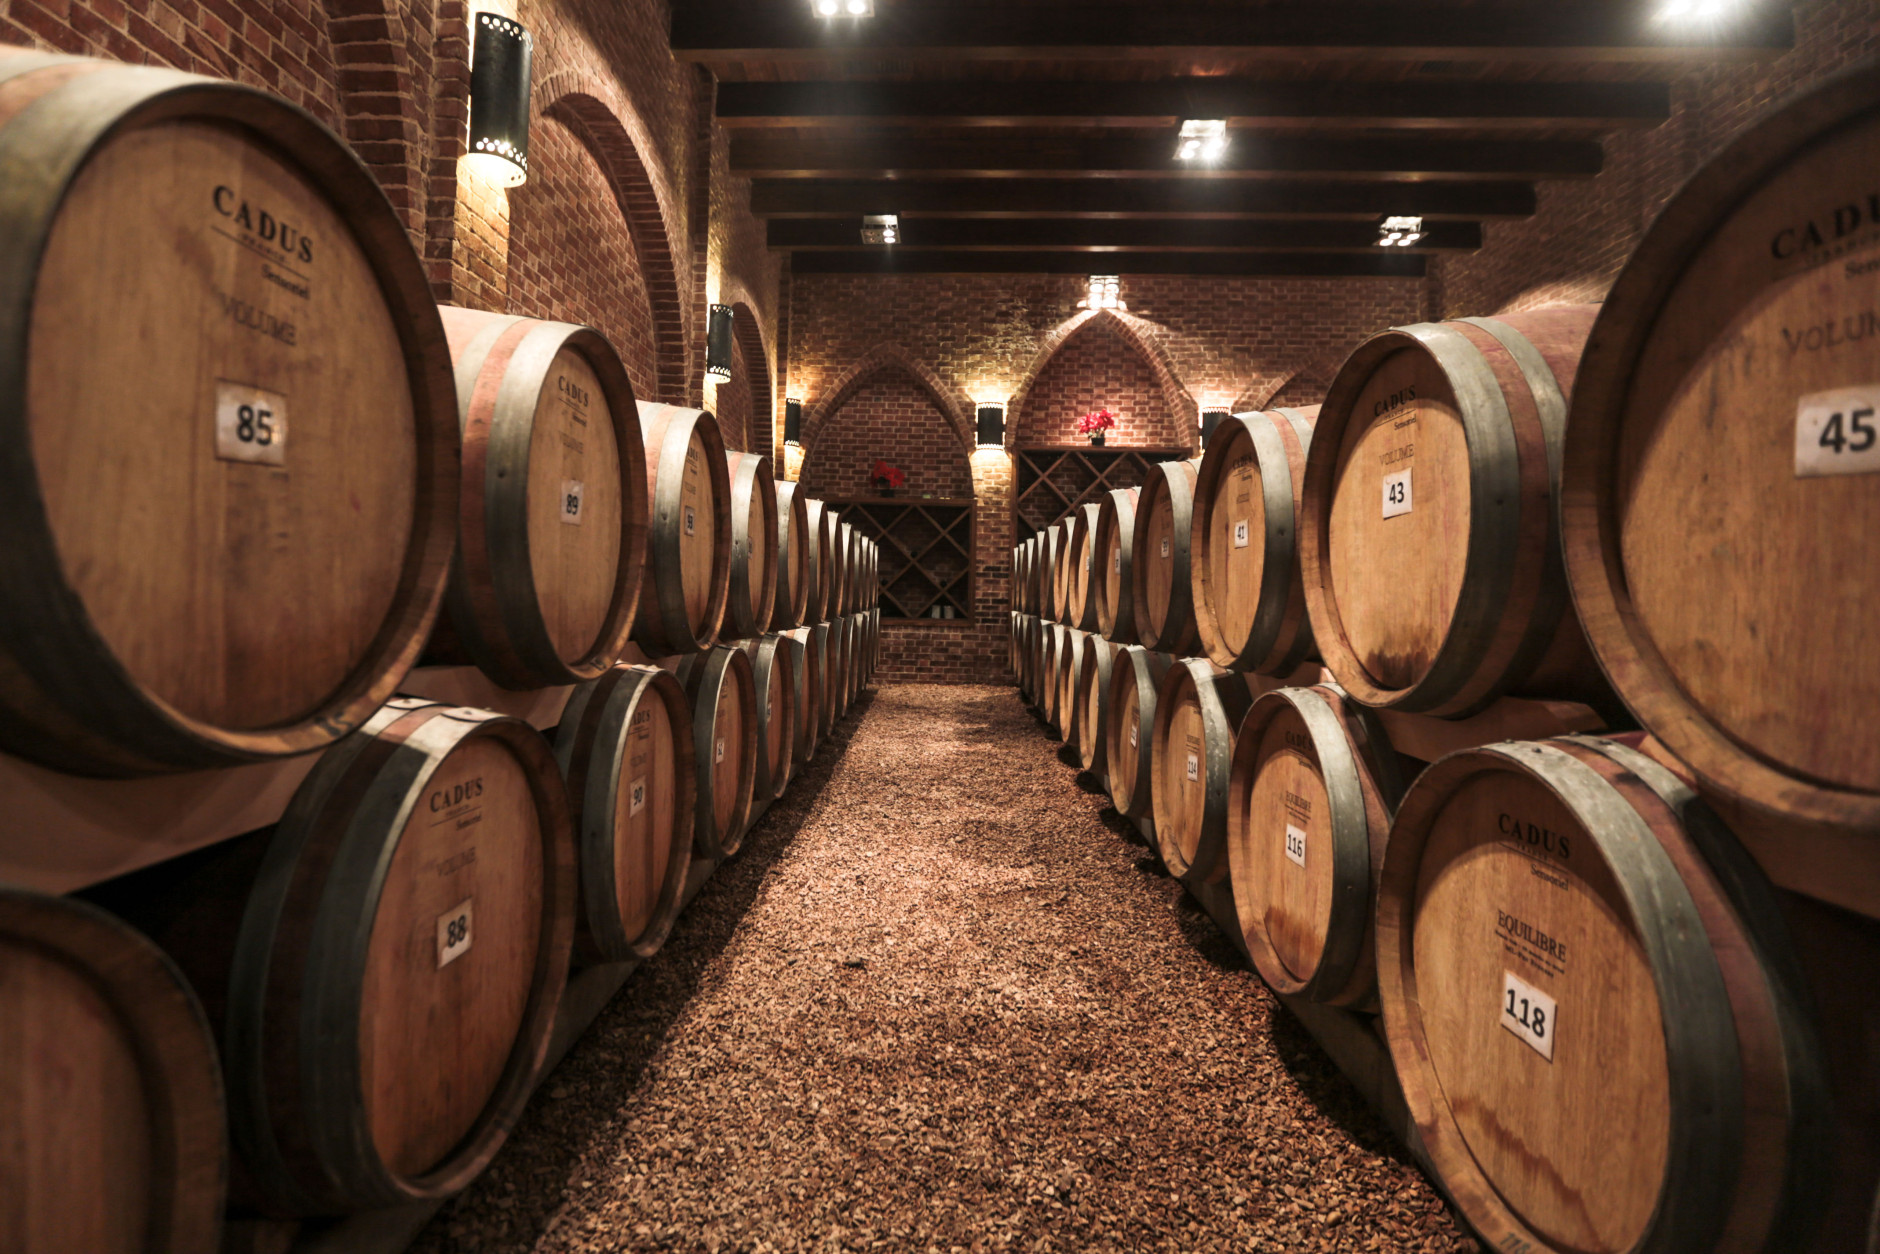 In this Wednesday, May 27, 2015 photo, oak barrels imported from France are stored in a barrel room, where produced wines are aged for at least 6 months, at the Gianaclis winery, one of Egypt's main wineries, in the Nile Delta, north of Cairo, Egypt. (AP Photo/Mosa'ab Elshamy)